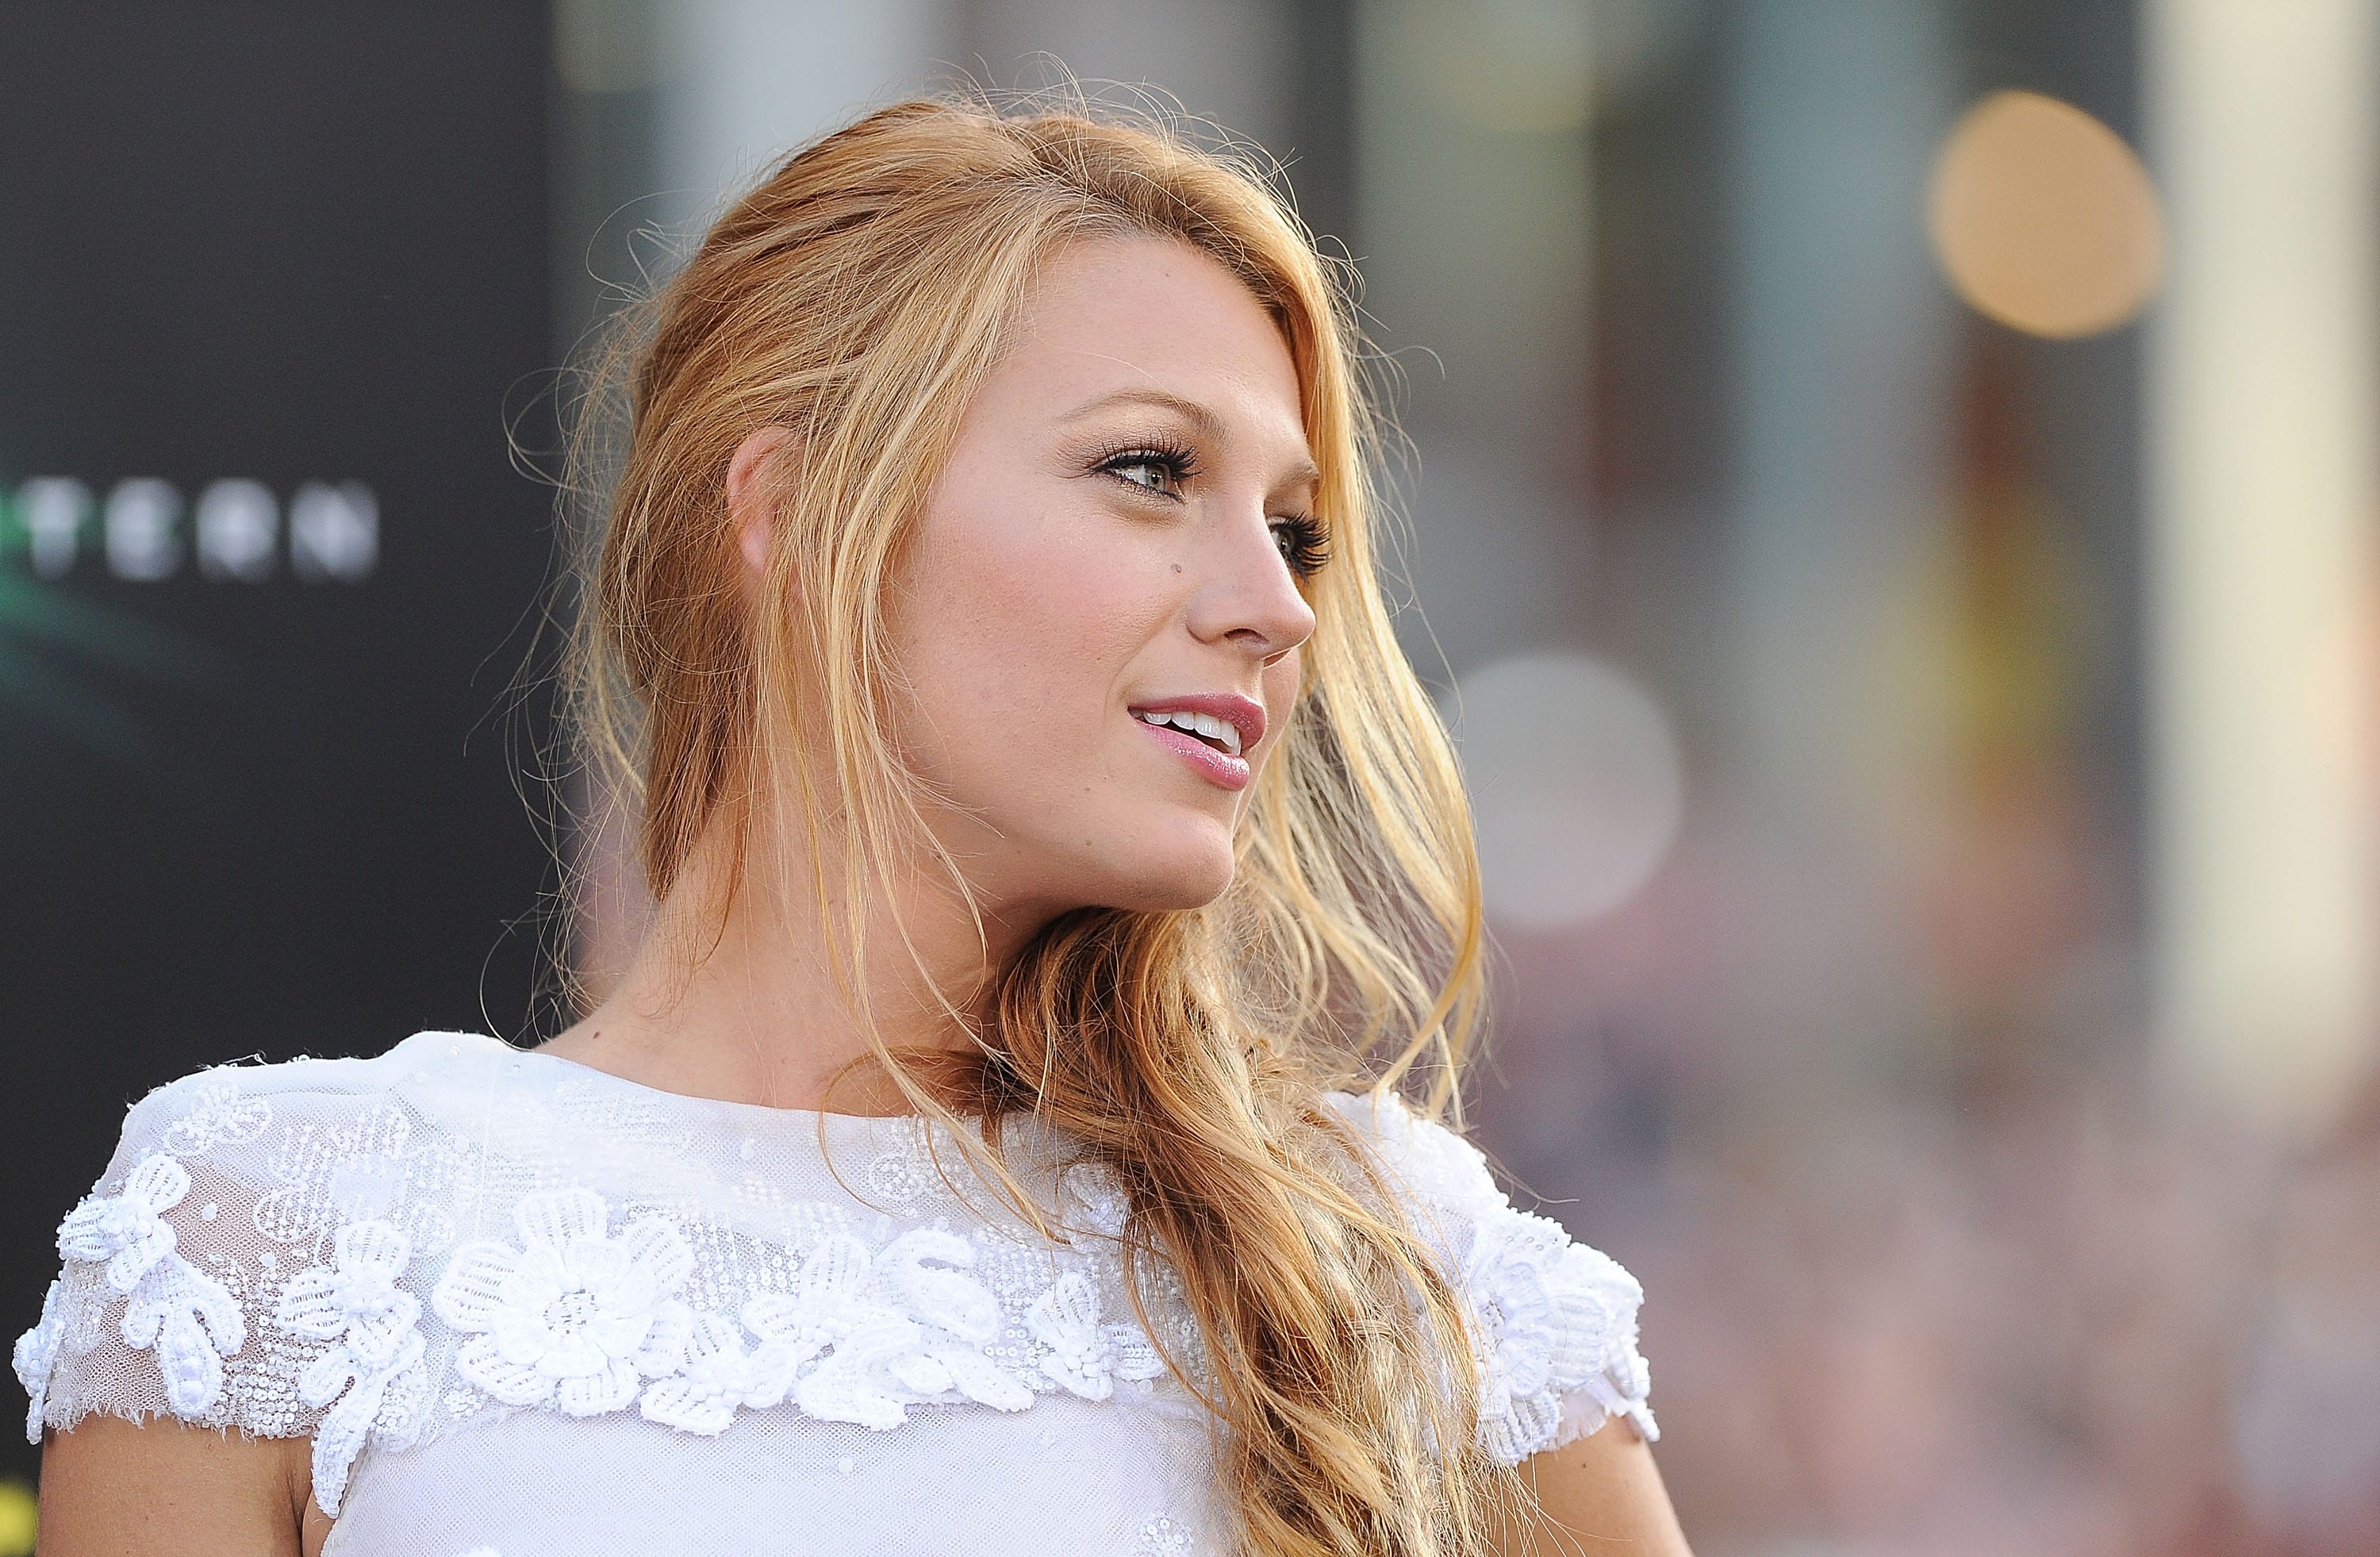 Blake Lively Hd Wallpapers 7wallpapers Net